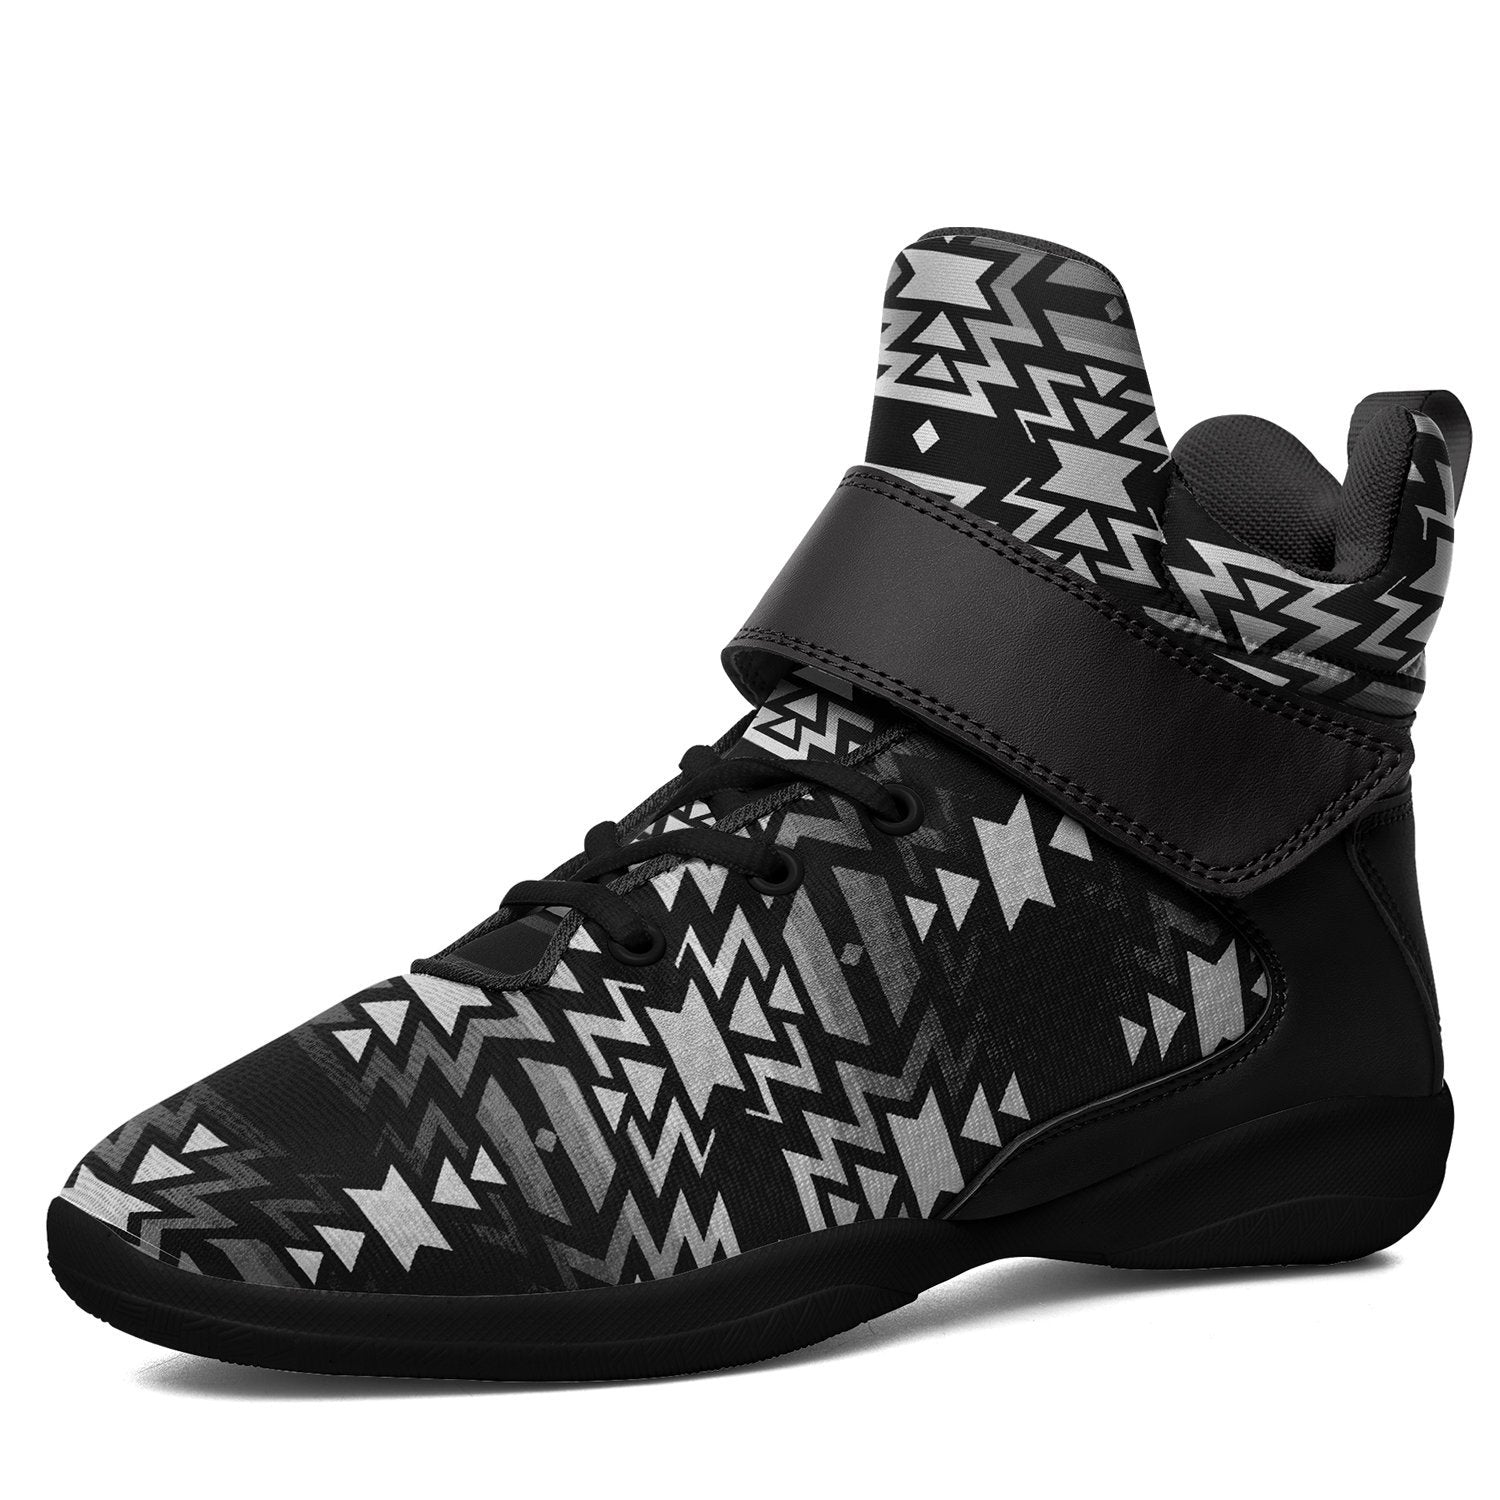 Black Fire Black and White Kid's Ipottaa Basketball / Sport High Top Shoes 49 Dzine US Women 4.5 / US Youth 3.5 / EUR 35 Black Sole with Black Strap 